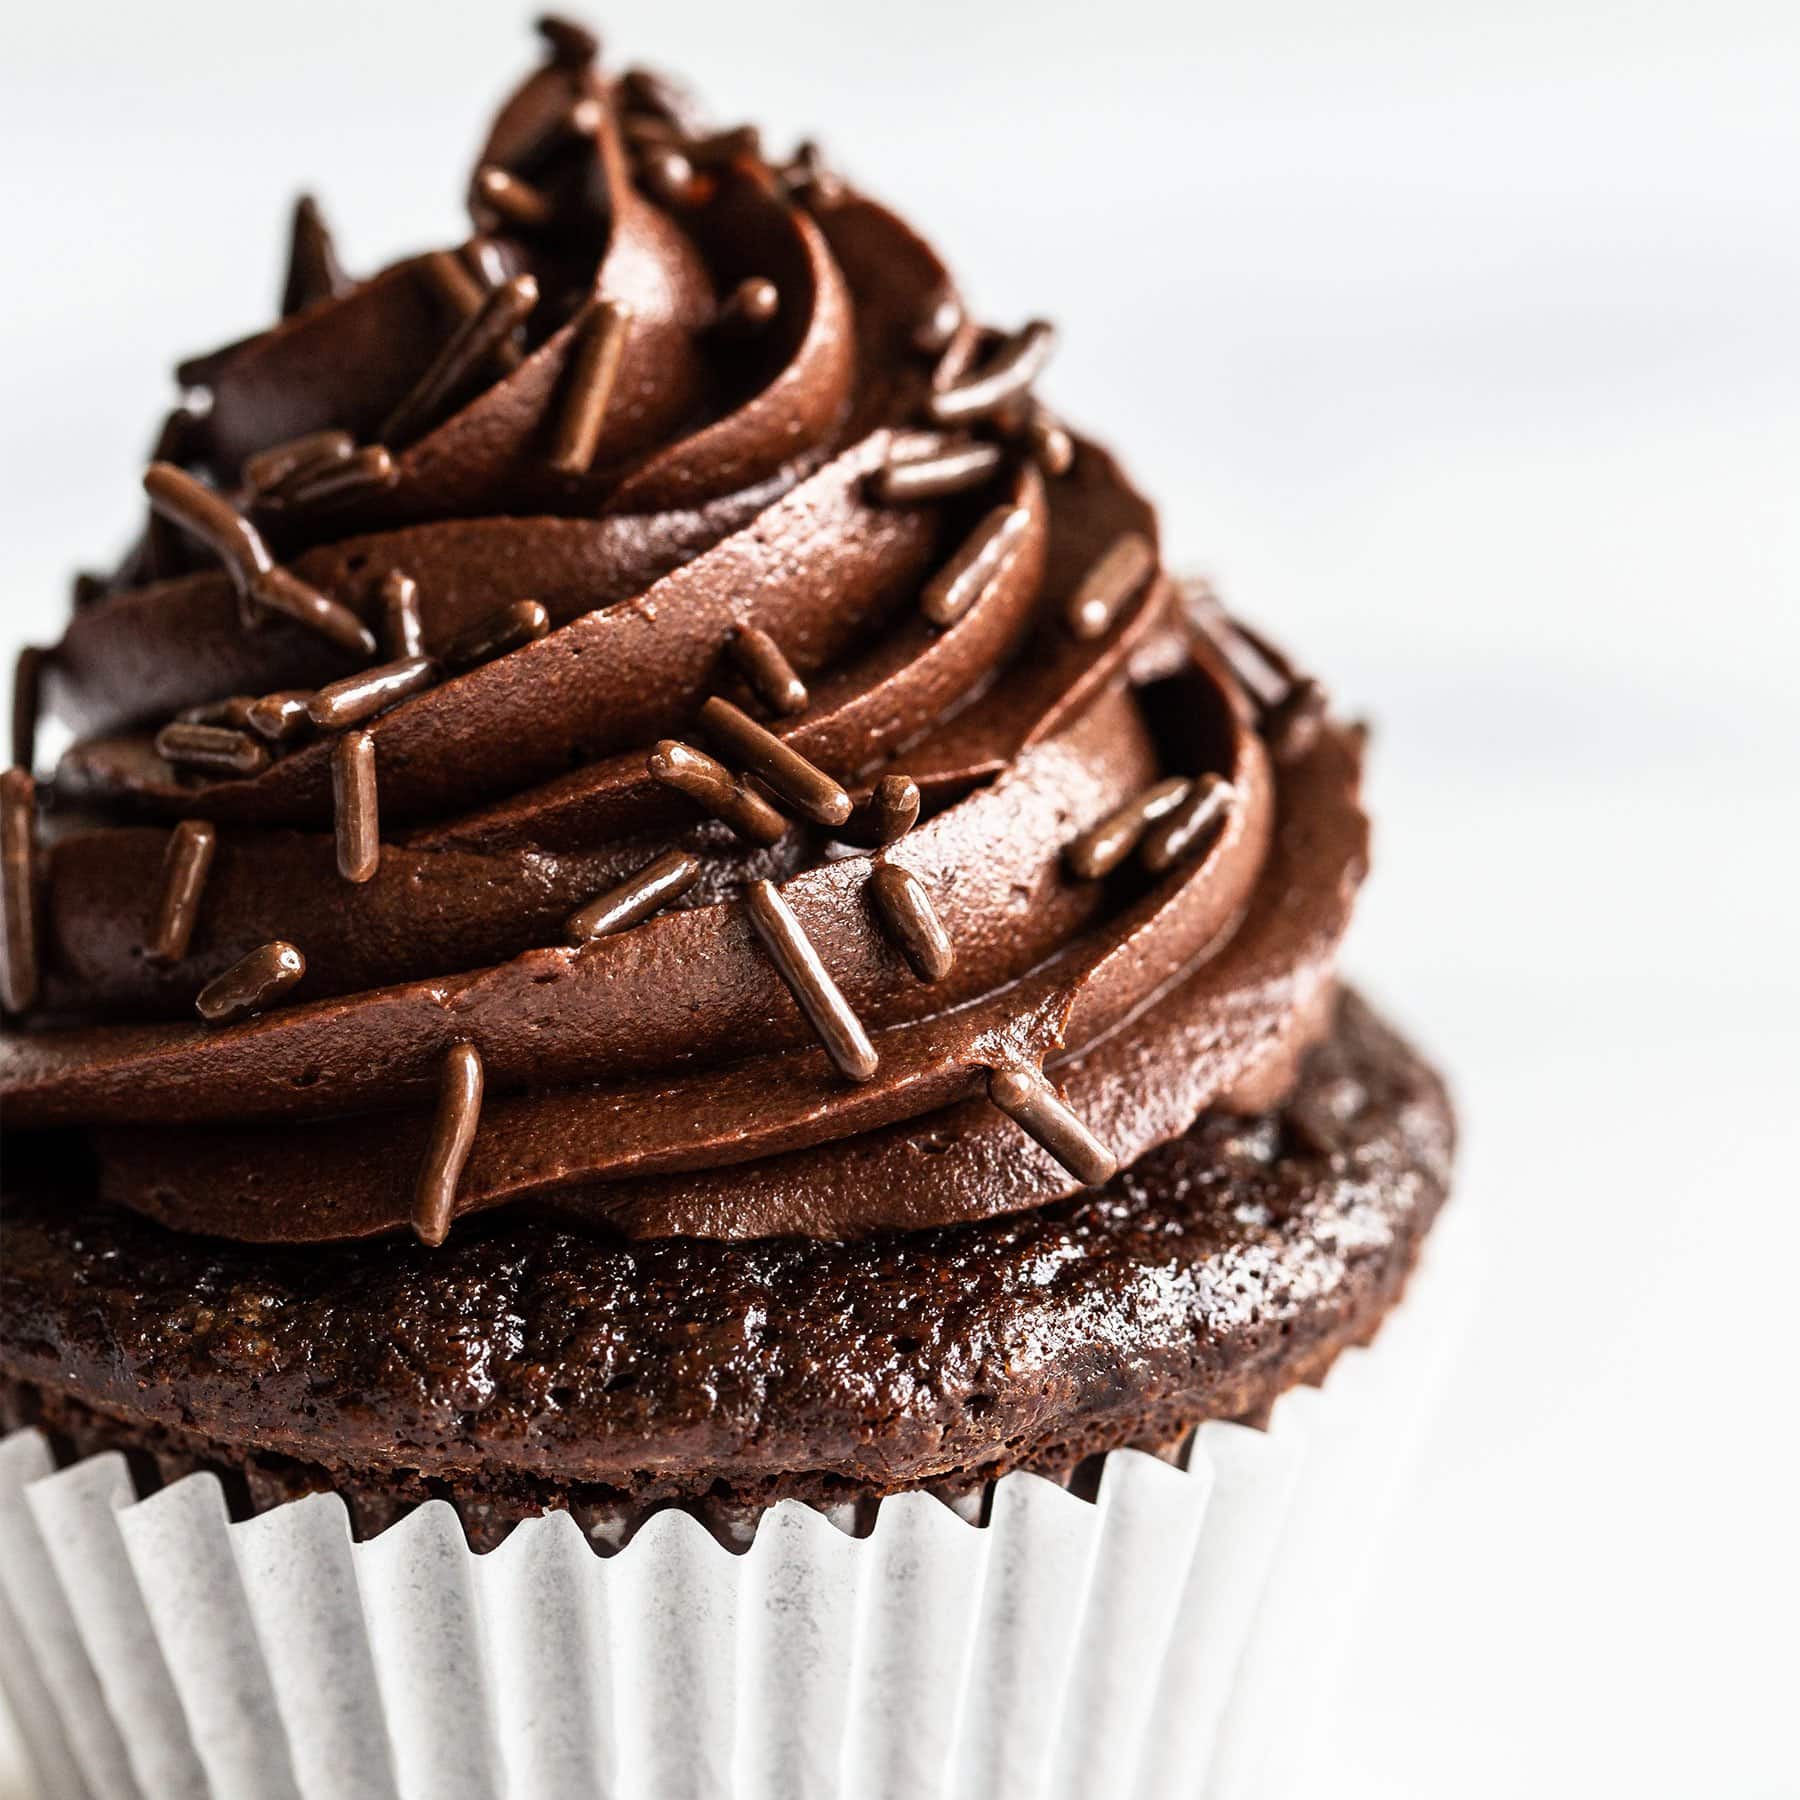 chocolate buttercream on top of a chocolate cupcake with chocolate sprinkles.